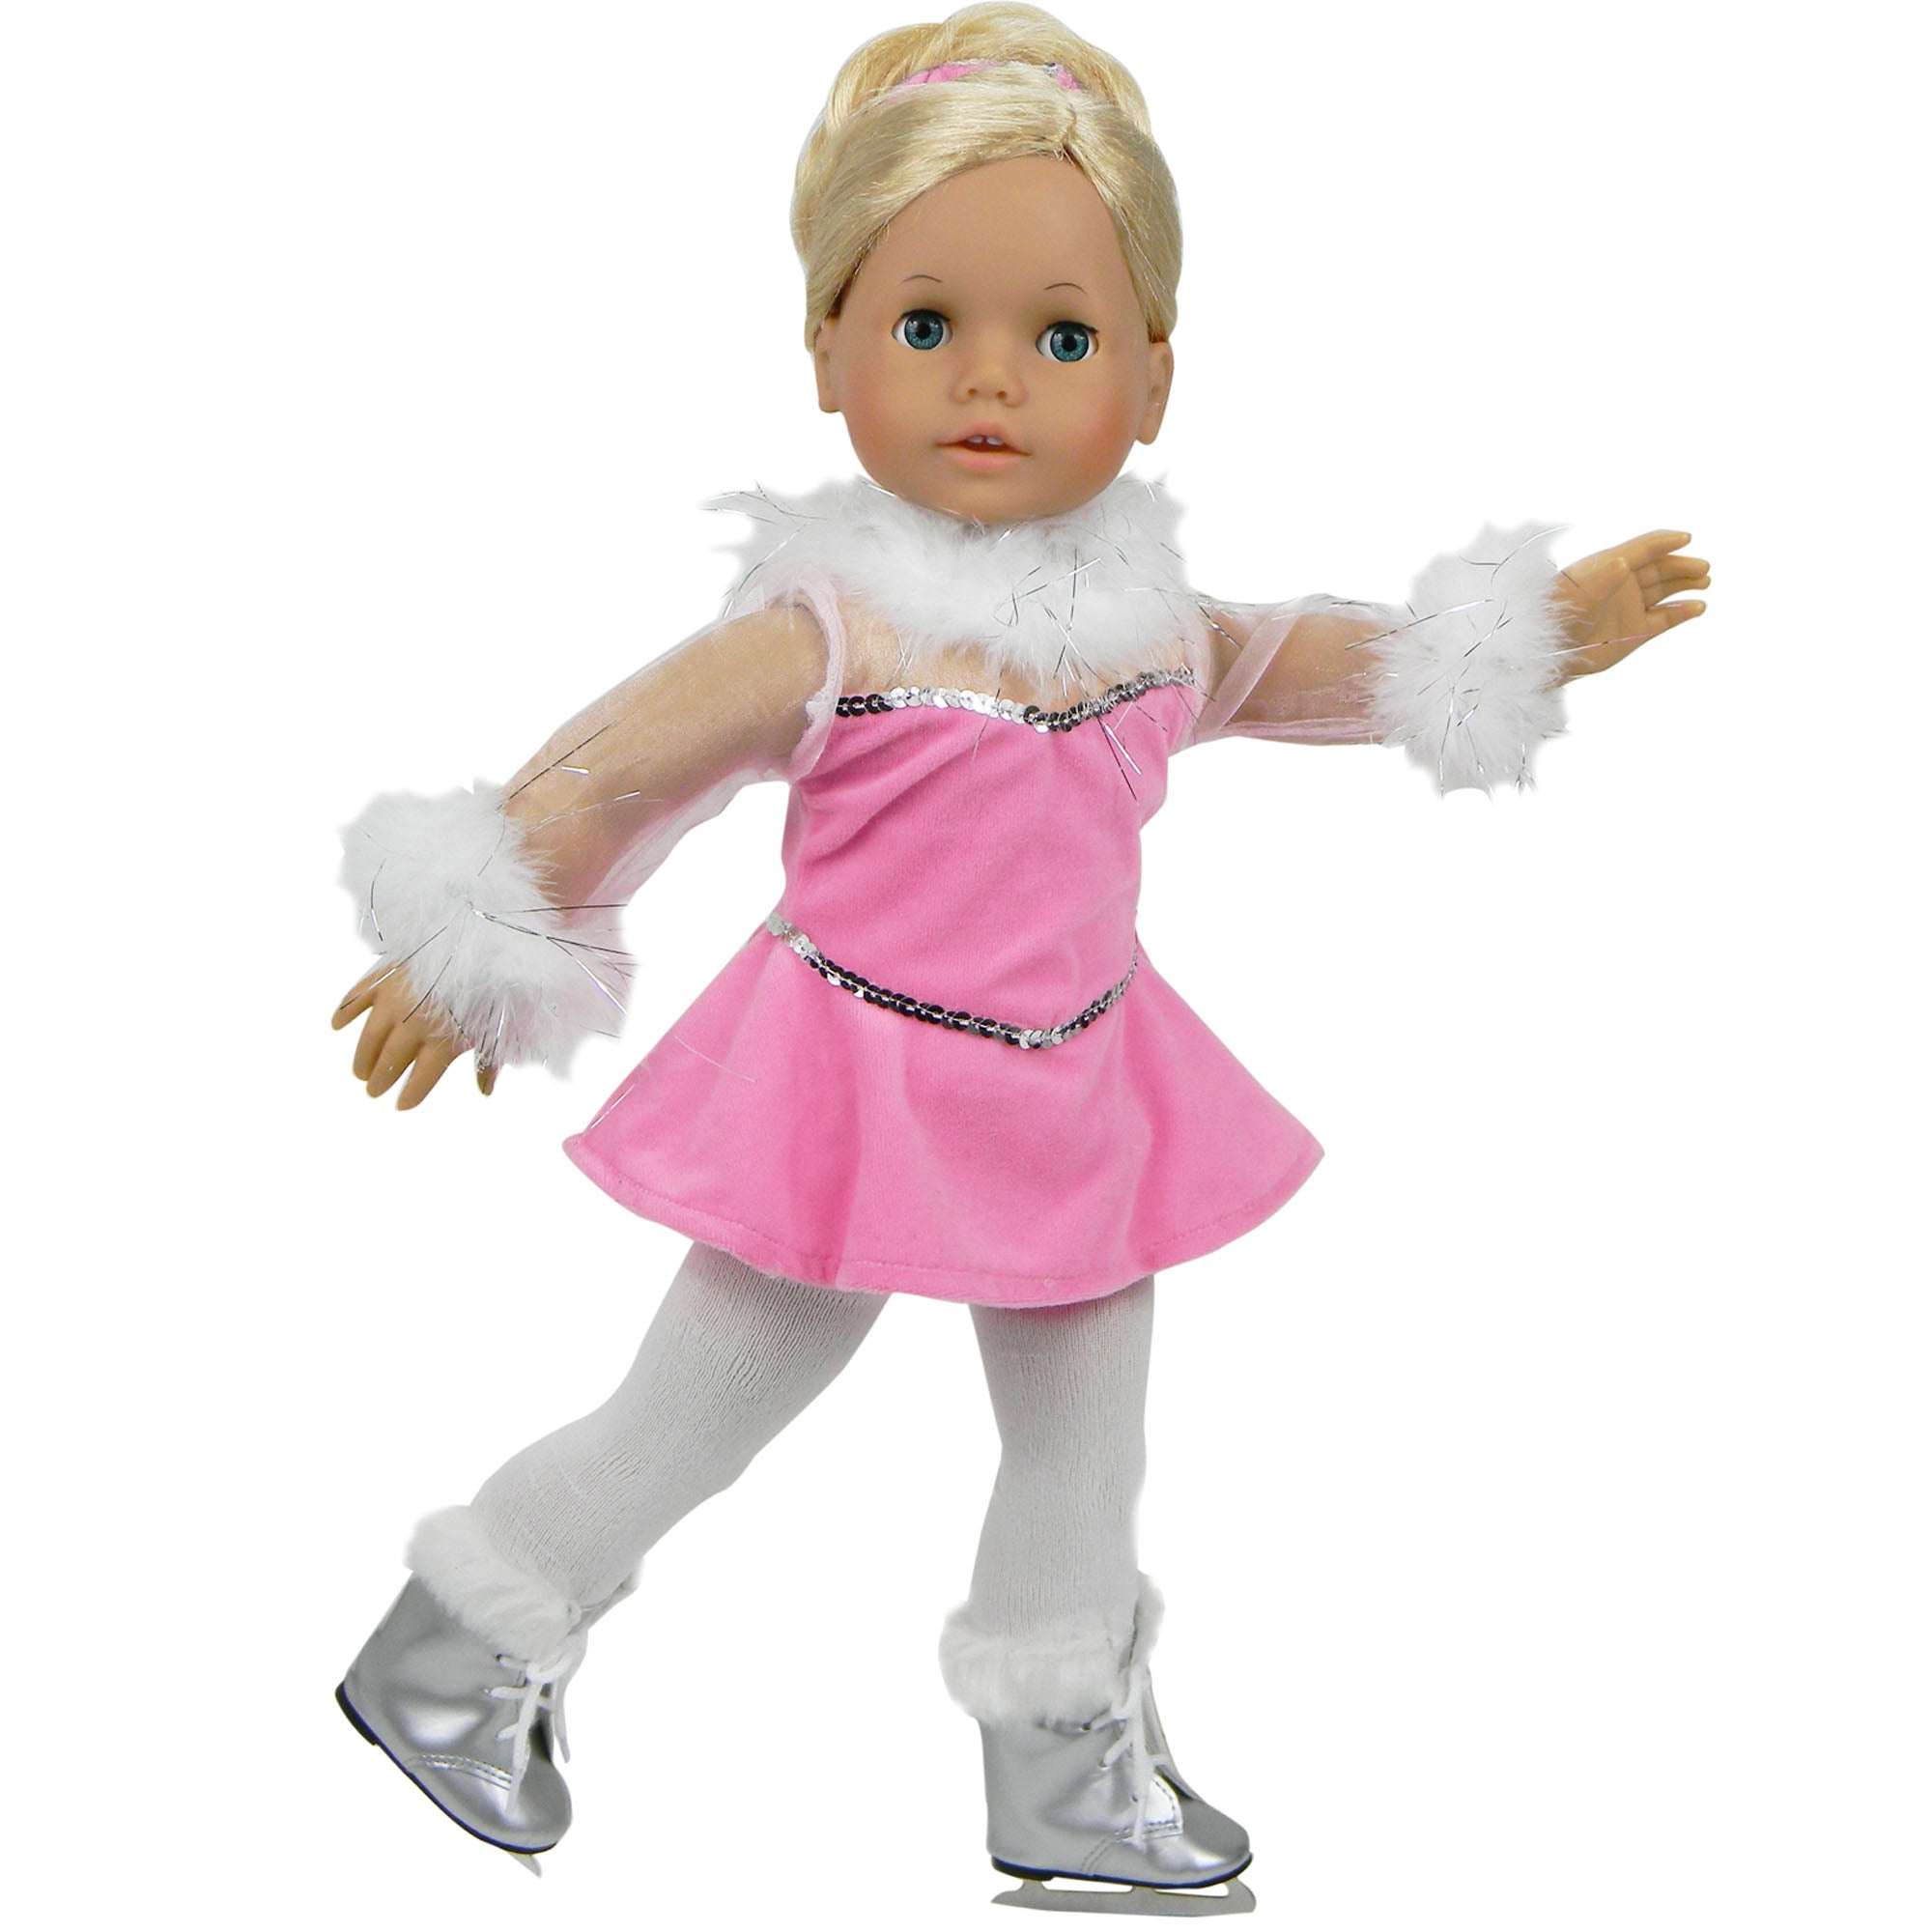 Sophia’s Complete Three-Piece Ice Skating Costume Set Including Gown with Mesh Sleeves & Silver Sequins, Panties, & Scrunchy Ponytail Holder for 18” Dolls, Pink